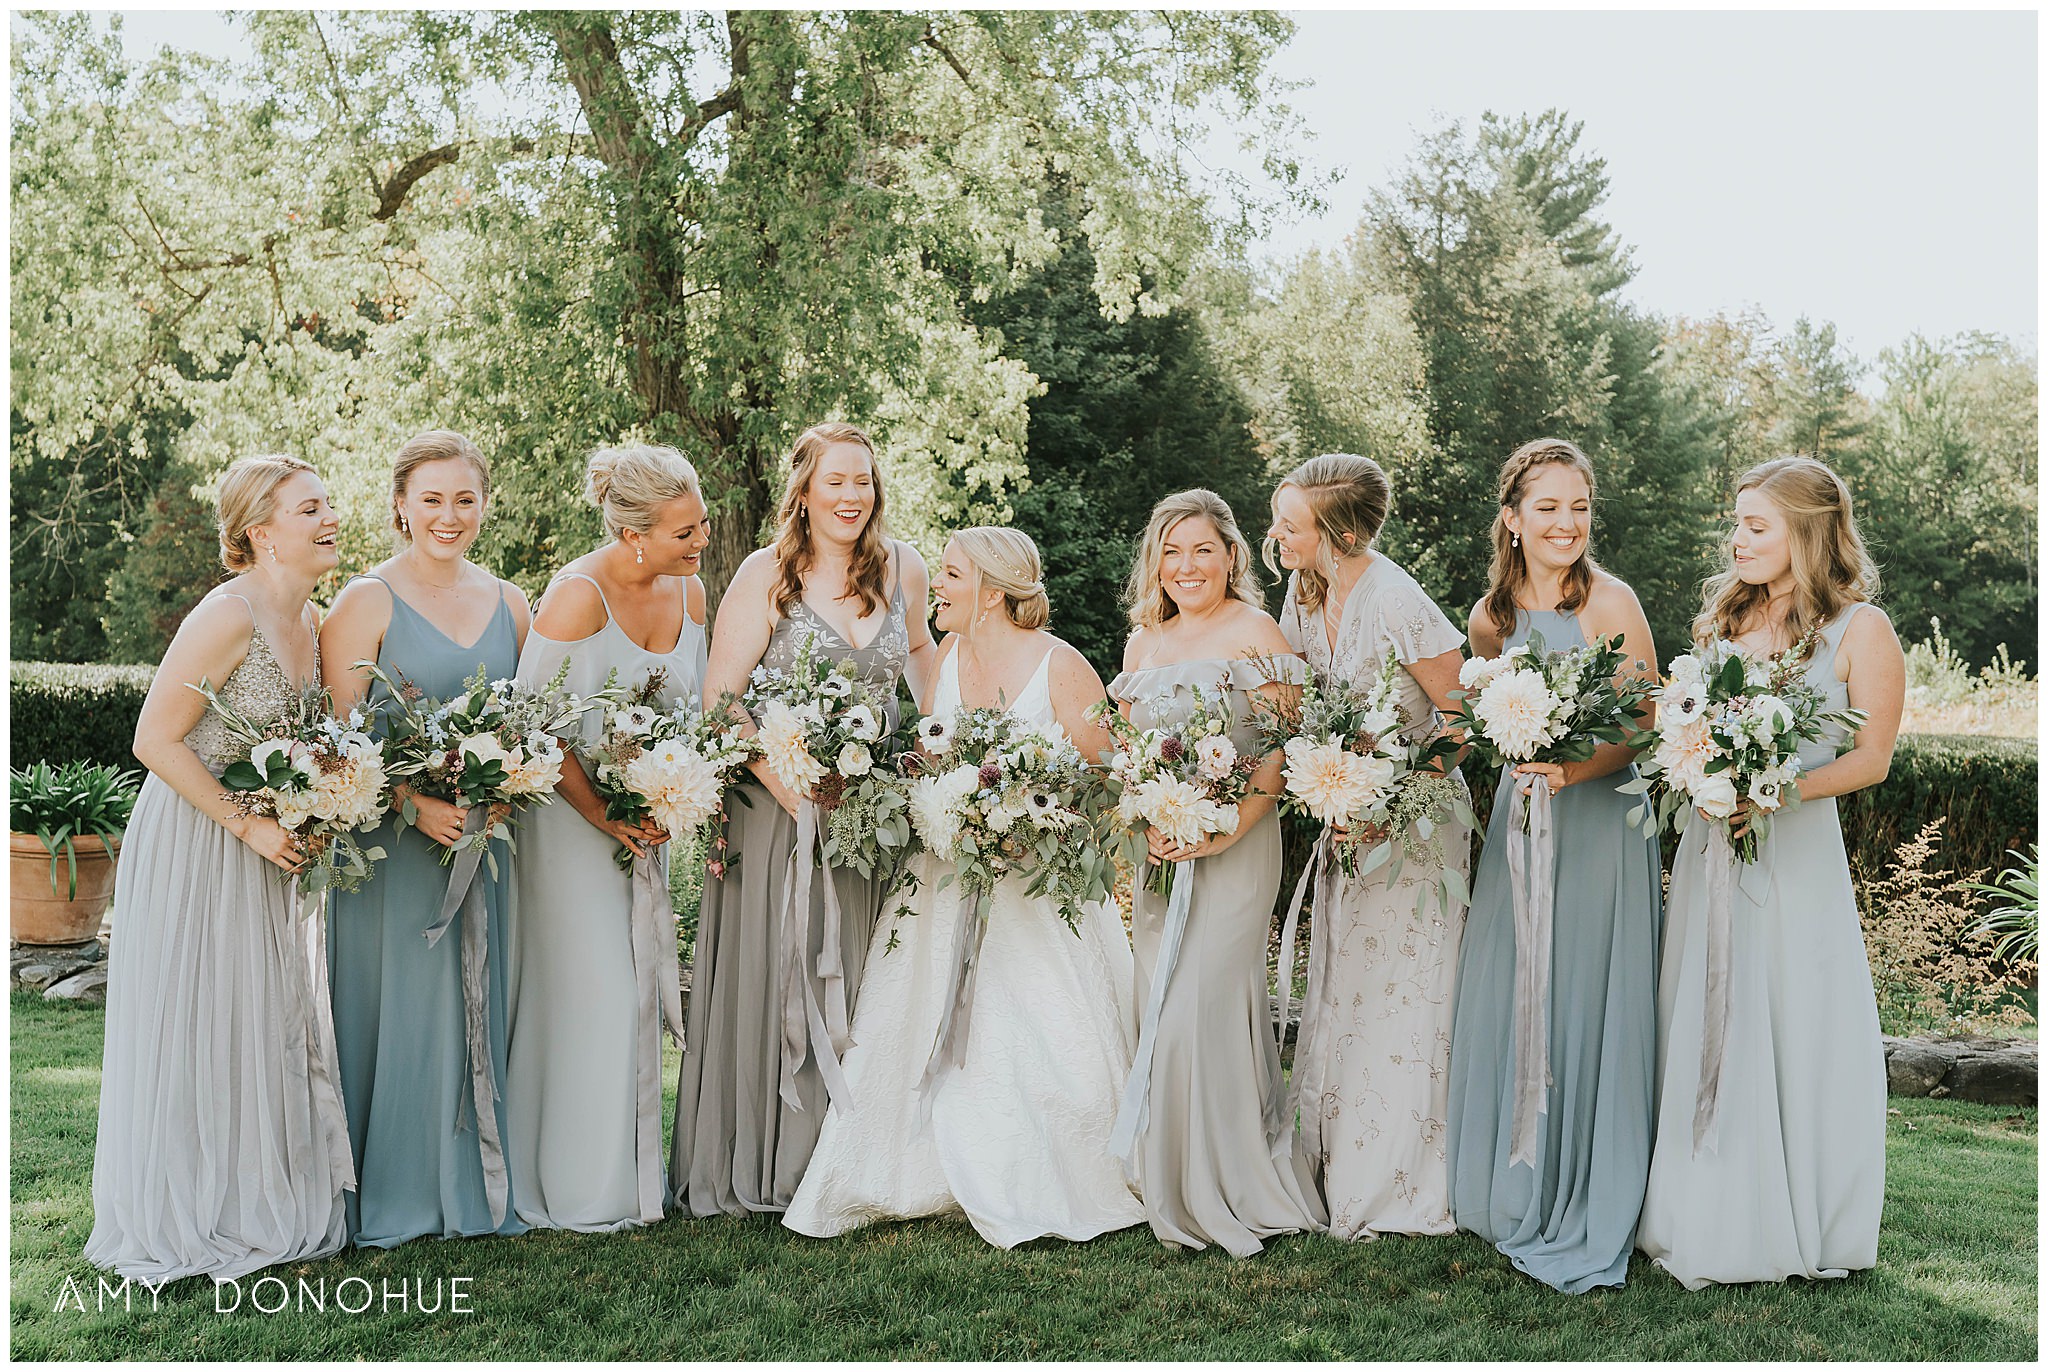 Wedding Party Portraits | The Fells Estate | The Prism House Event Design & Wedding Planning | New Hampshire Wedding Photographer | © Amy Donohue Photography